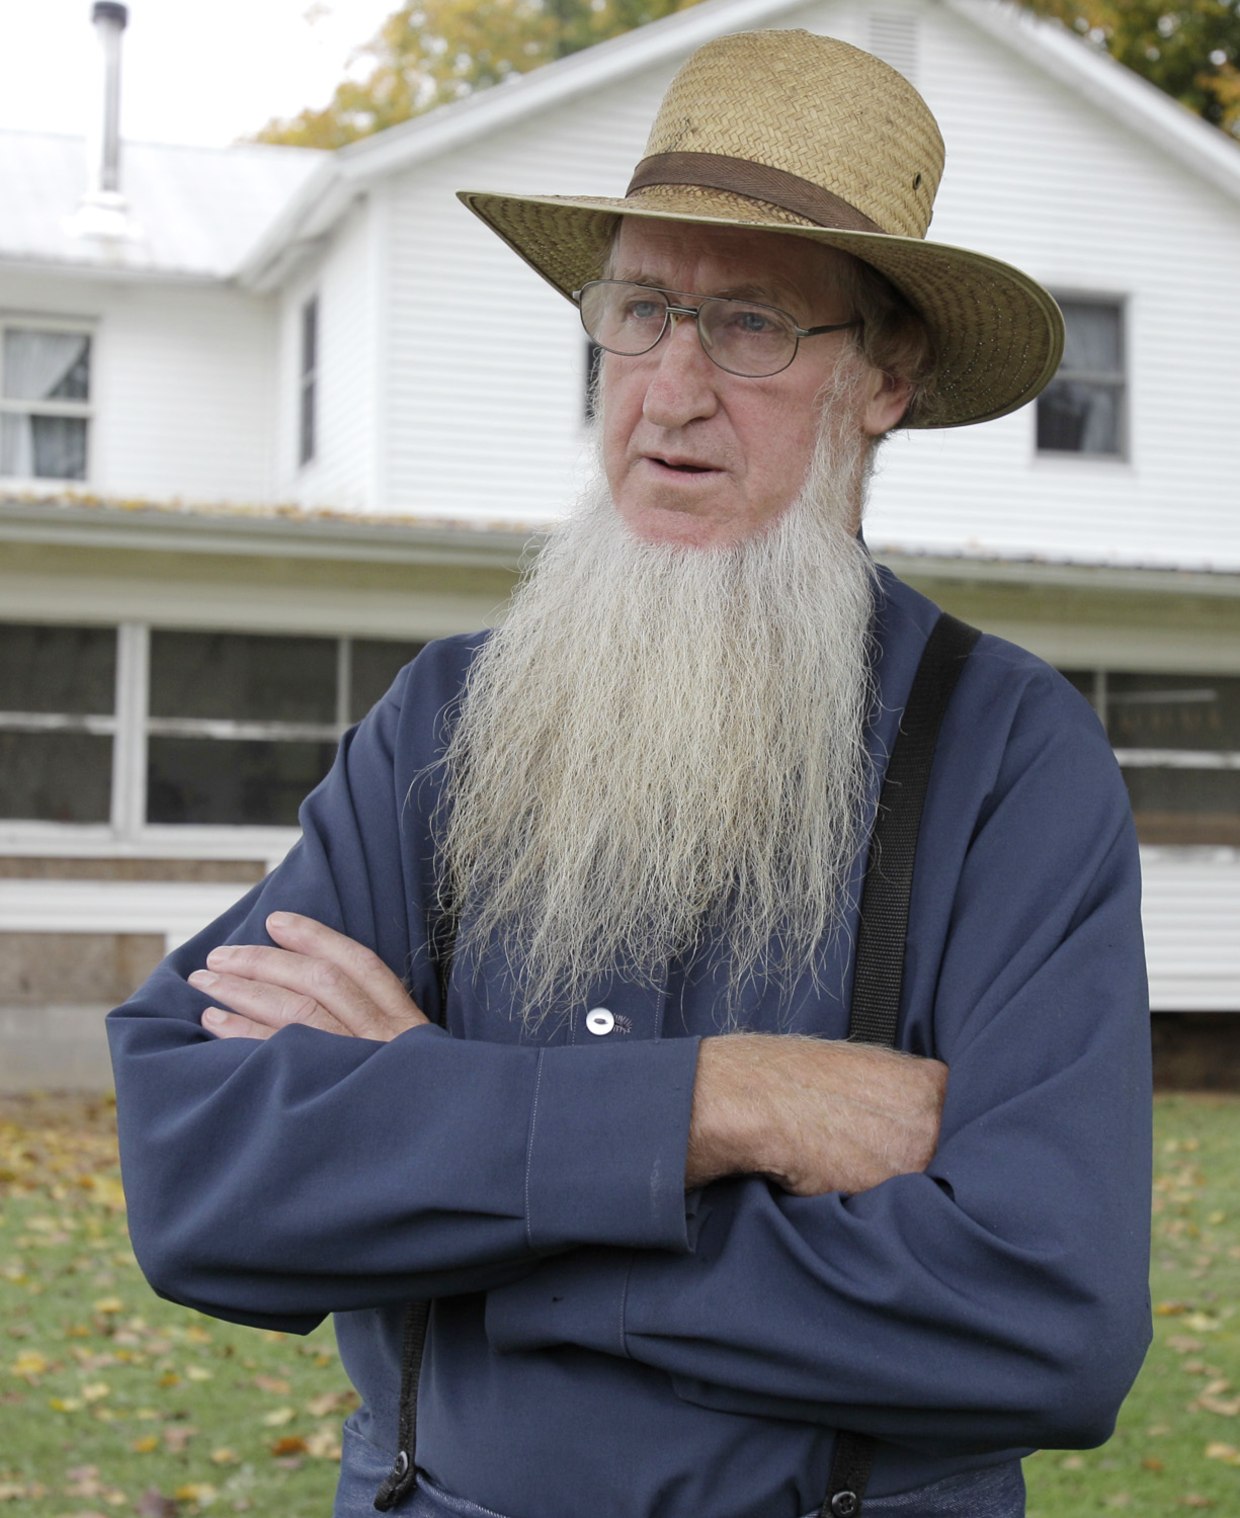 Amish leader: Beard-cutting a religious matter